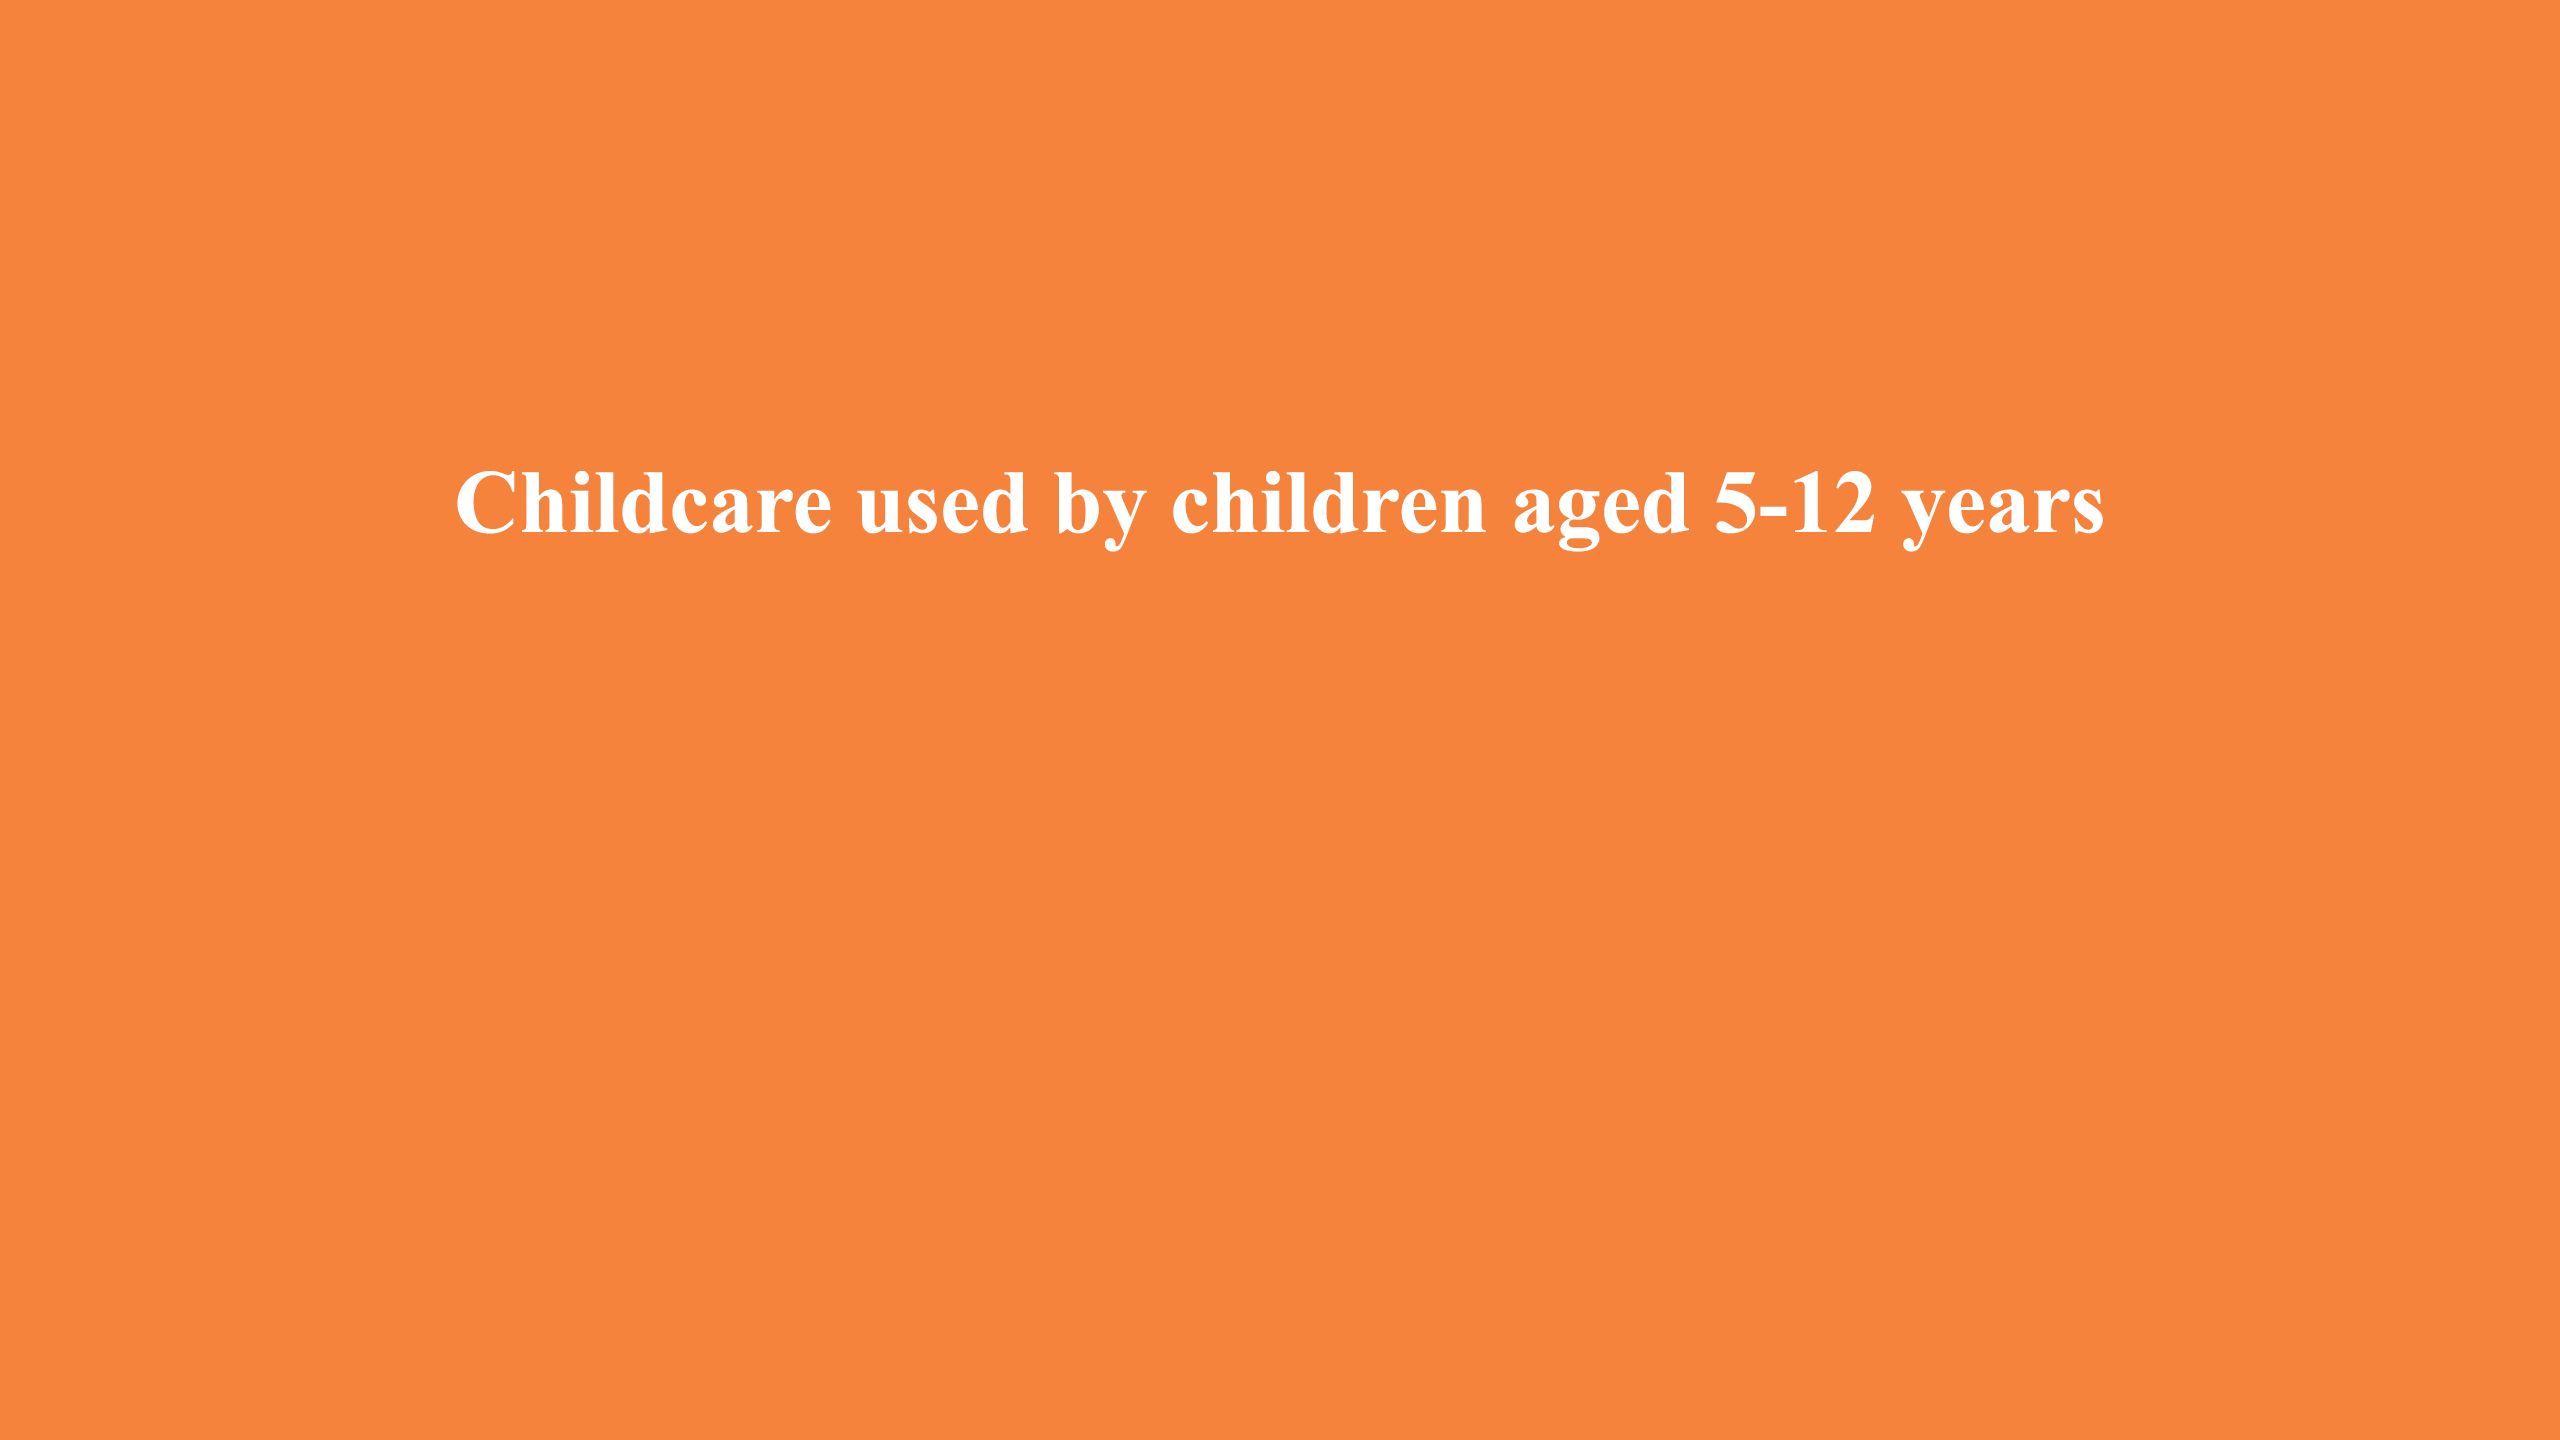 Childcare used by children aged 5-12 years